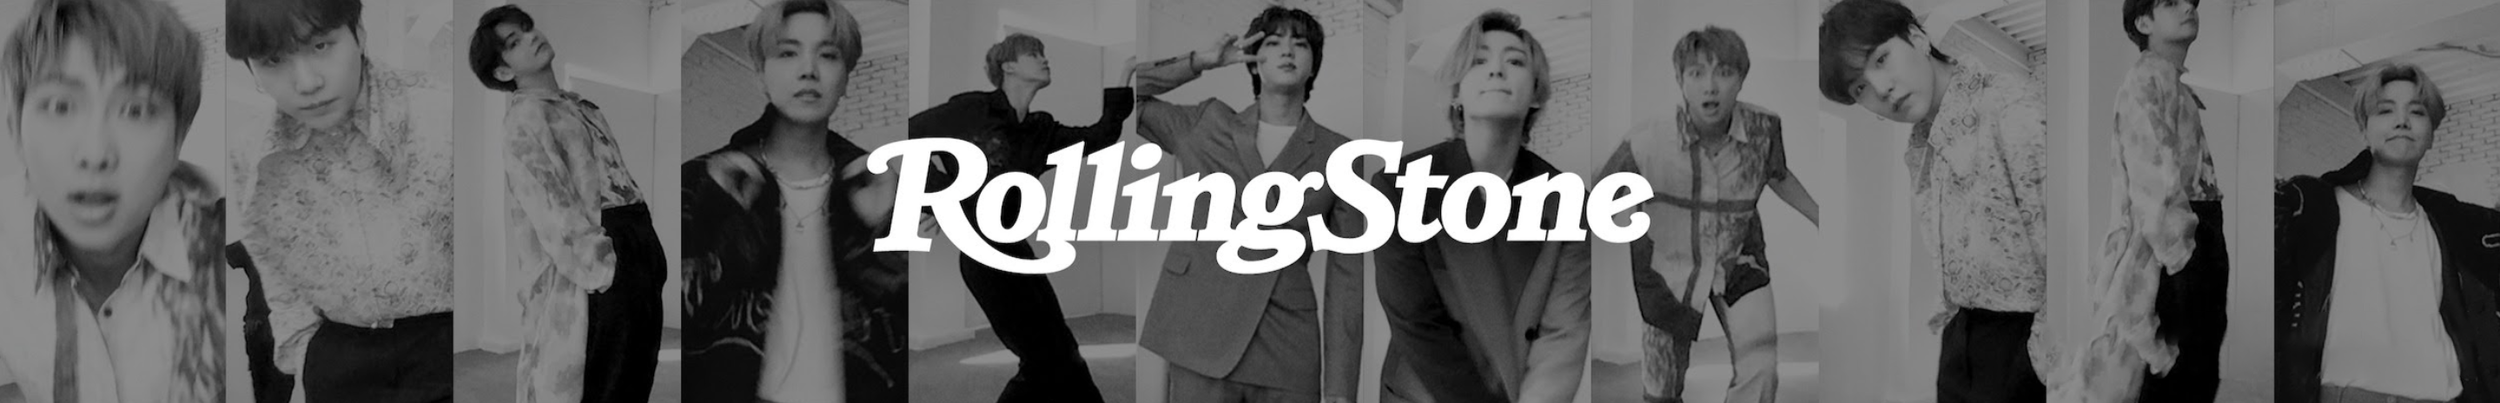 Rolling Stone June 2021 Special Collector's Box Set featuring BTS